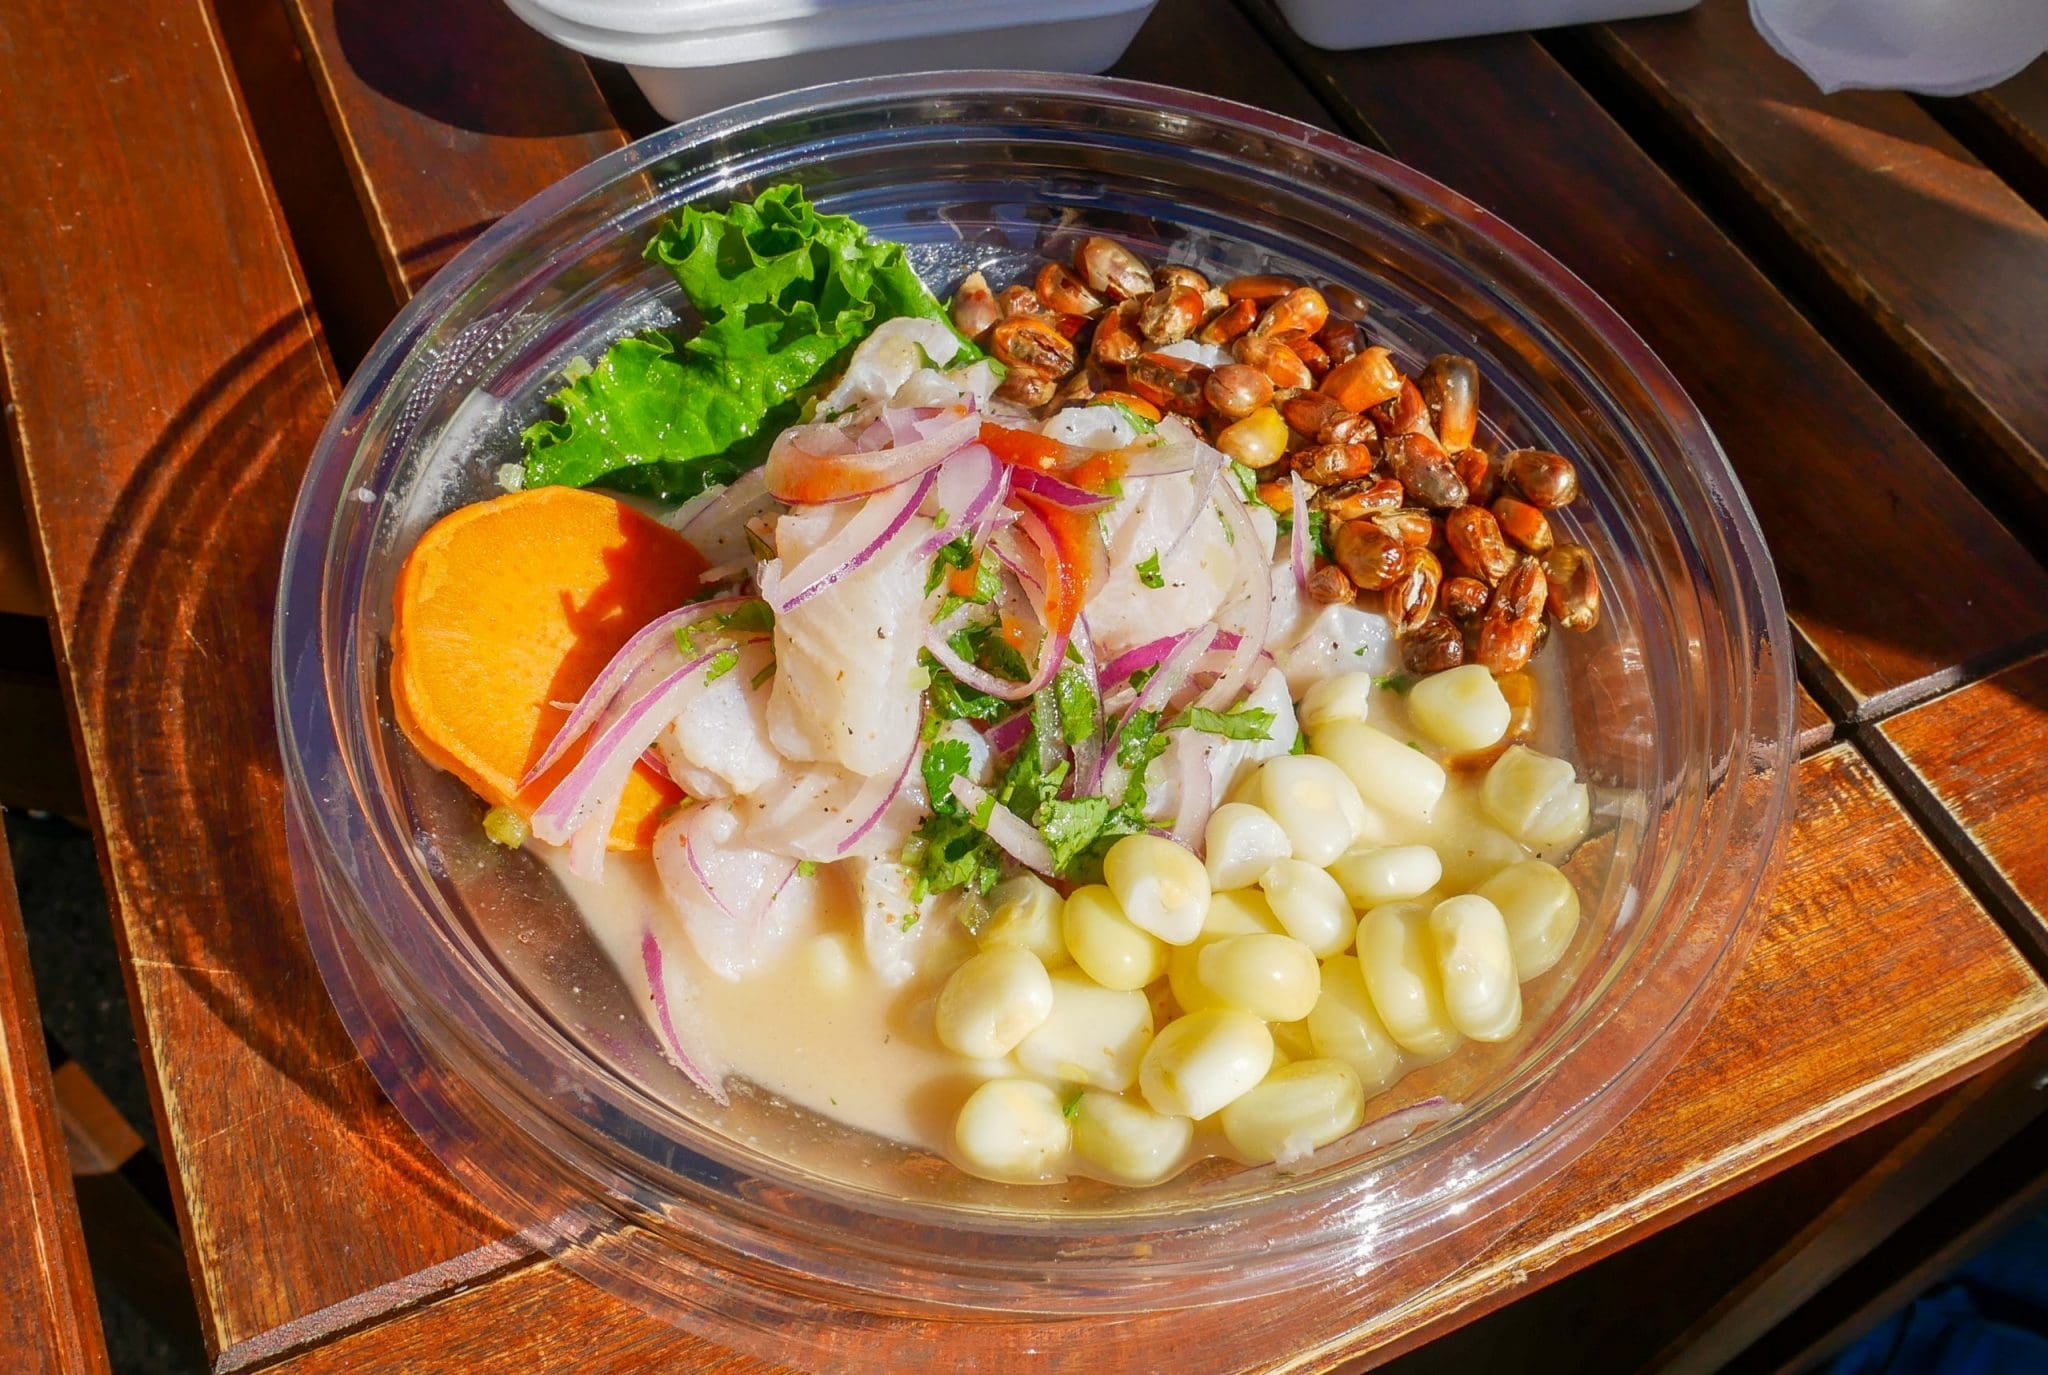 white fish ceviche, lupine beans, sweet potato slices and salad